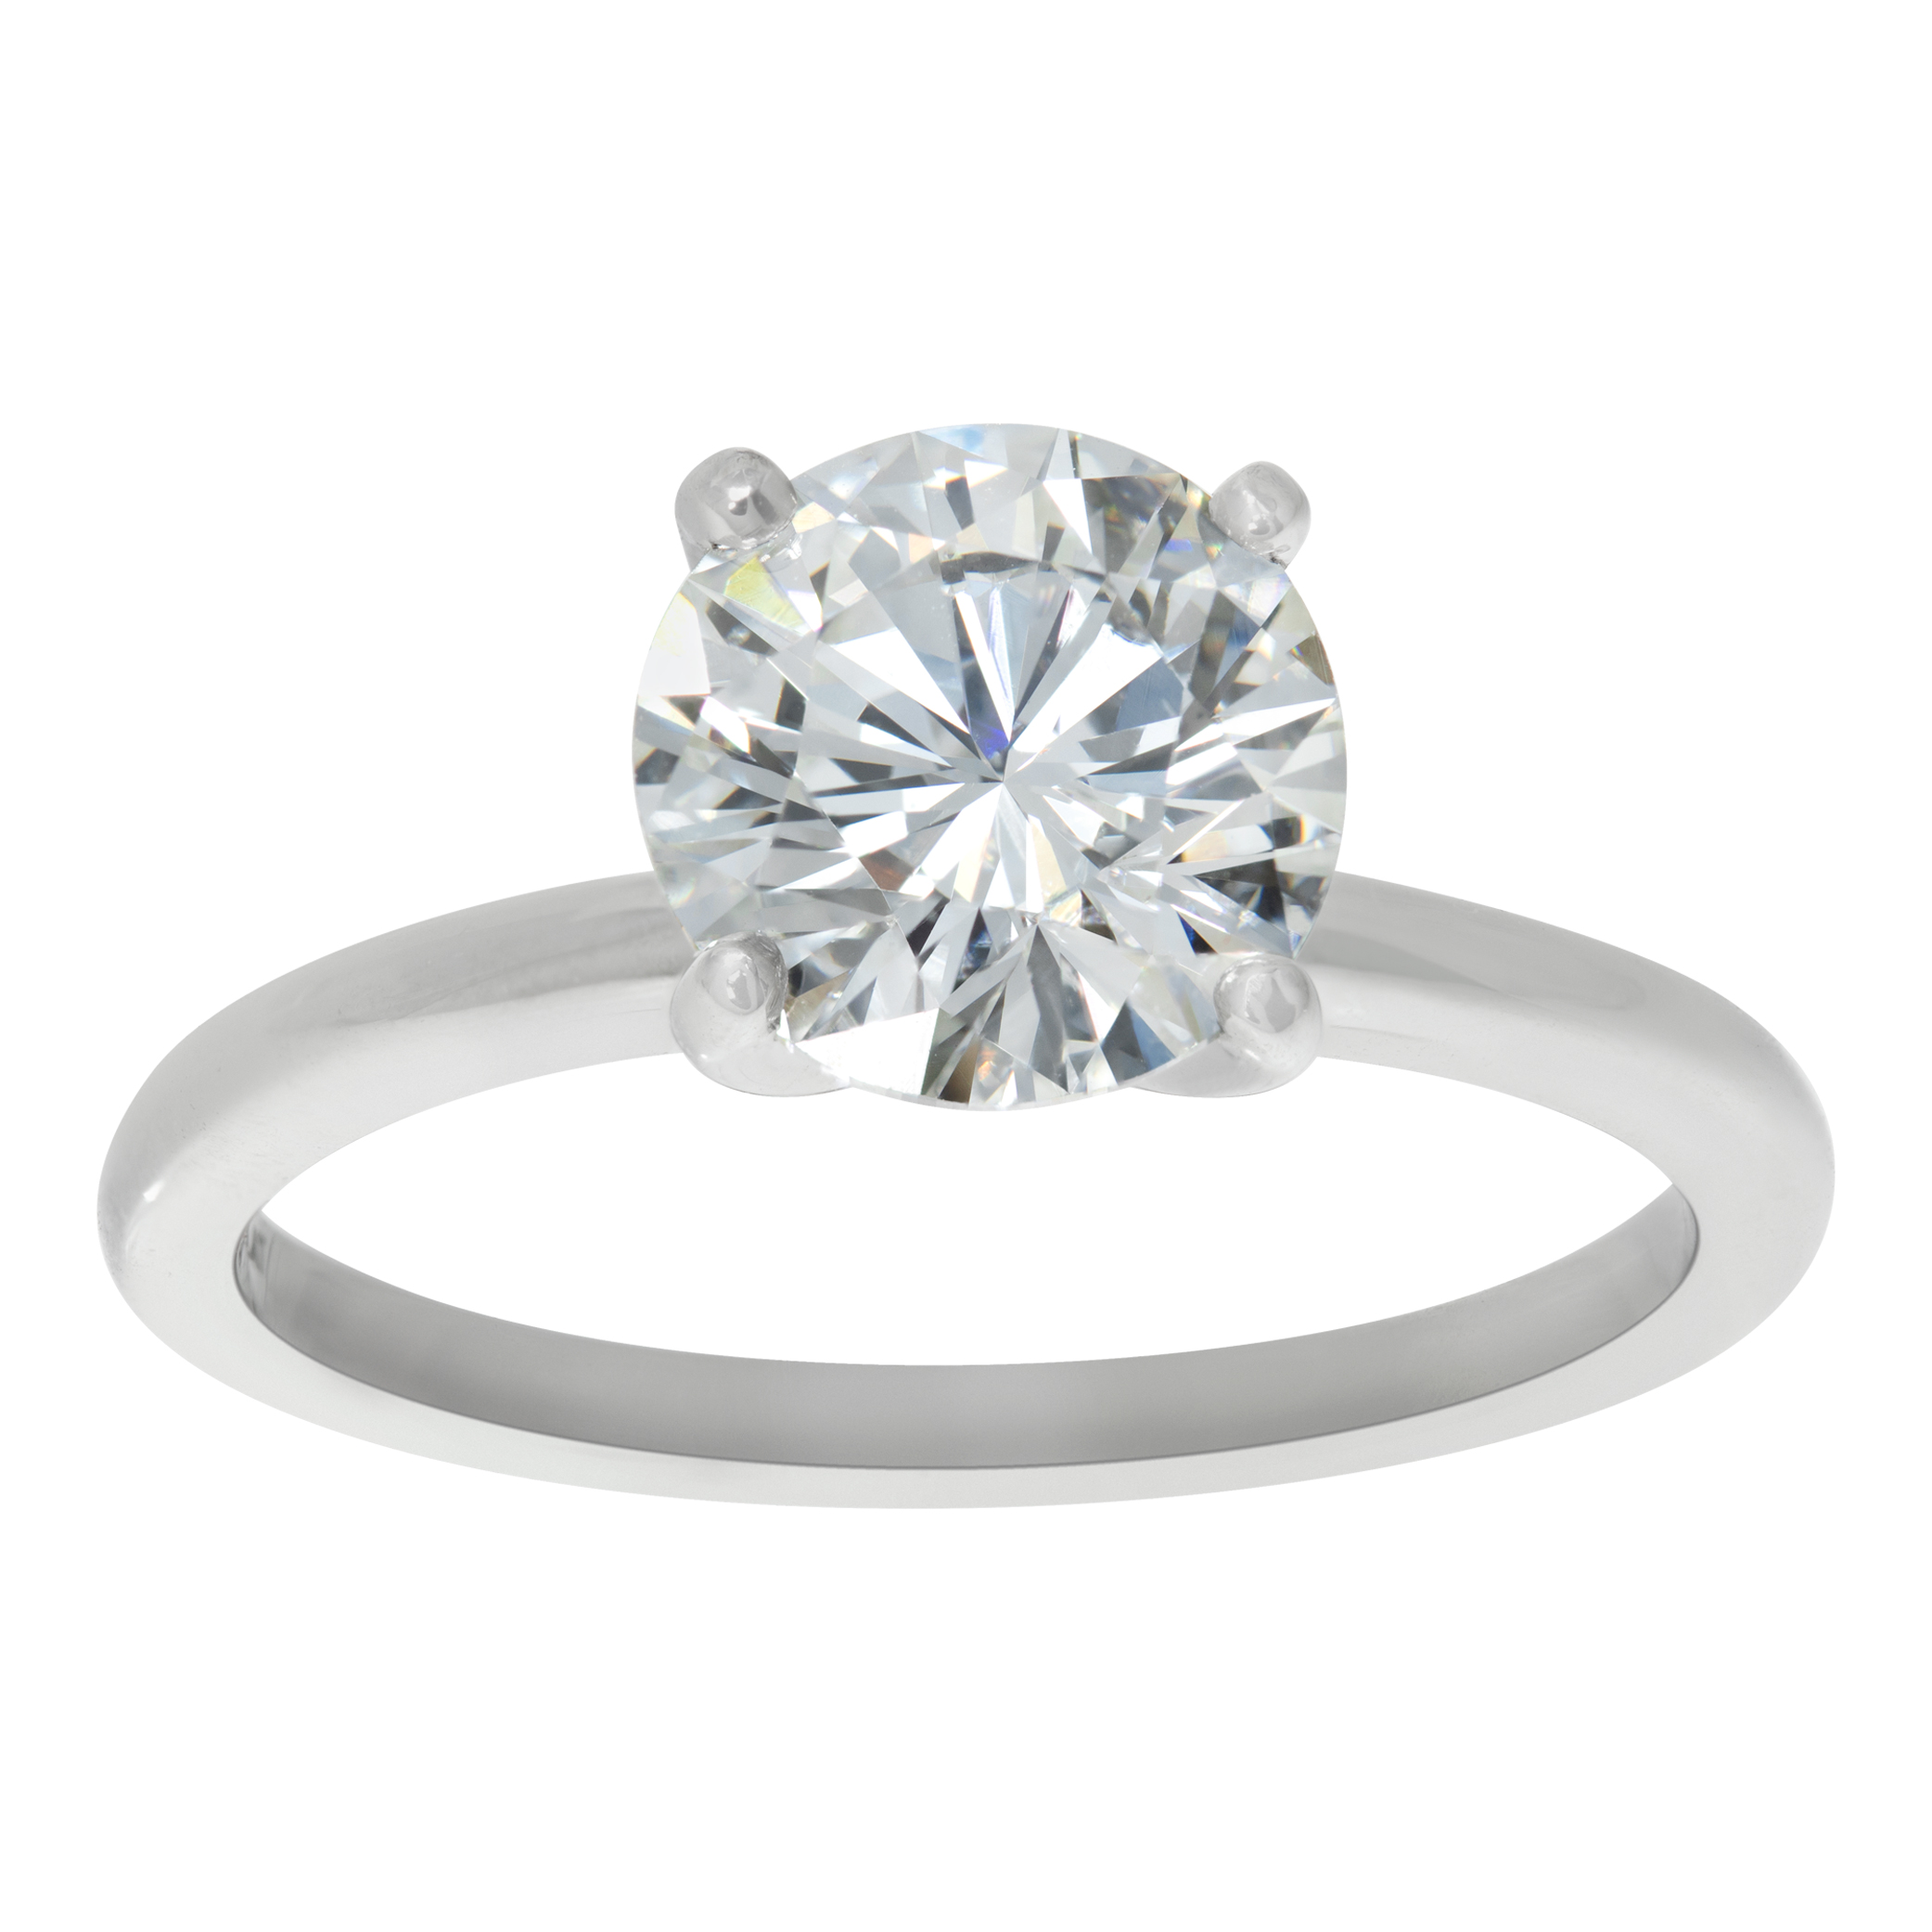 GIA certified round brilliant diamond 2 carat (H color, SI1 clarity) ring set in platinum 4 prong setting image 1